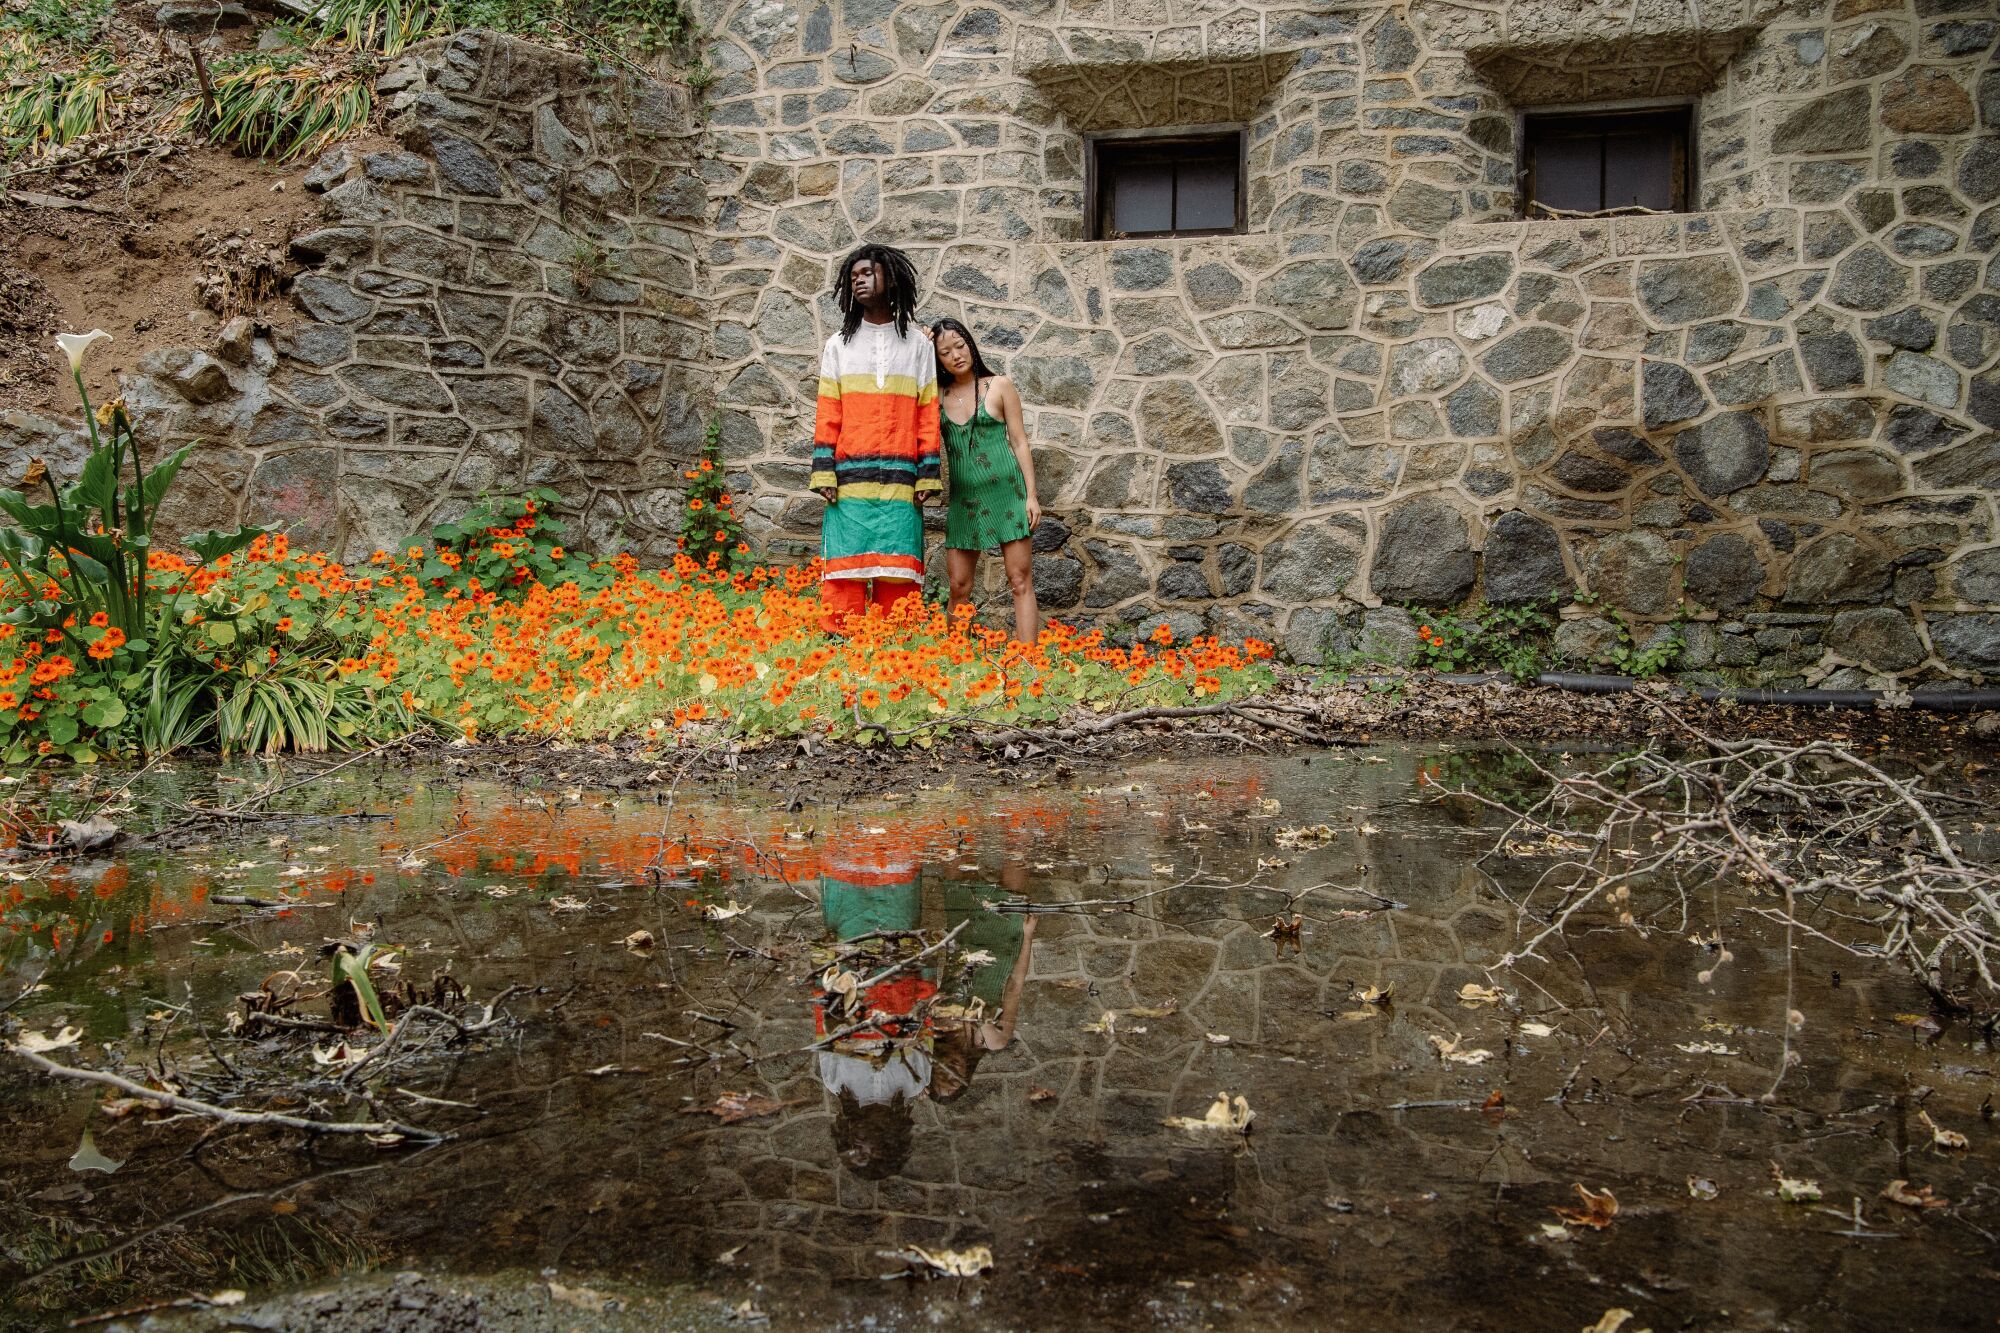 the model poses in front of the stone structure among the orange flowers with the swamp in front